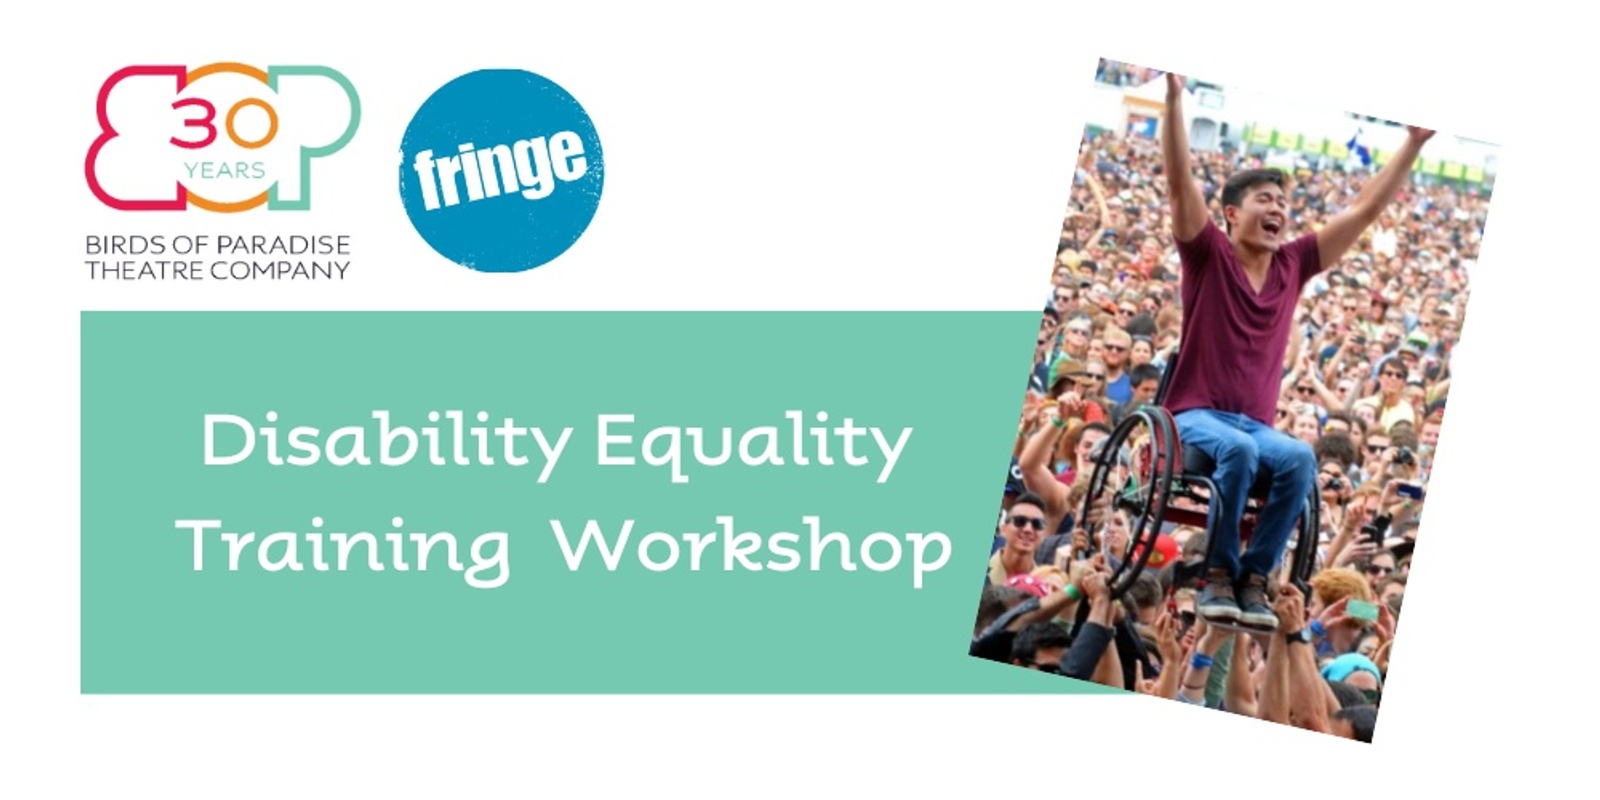 Banner image for Disability Equality Training Workshop from Birds of Paradise Theatre Company 